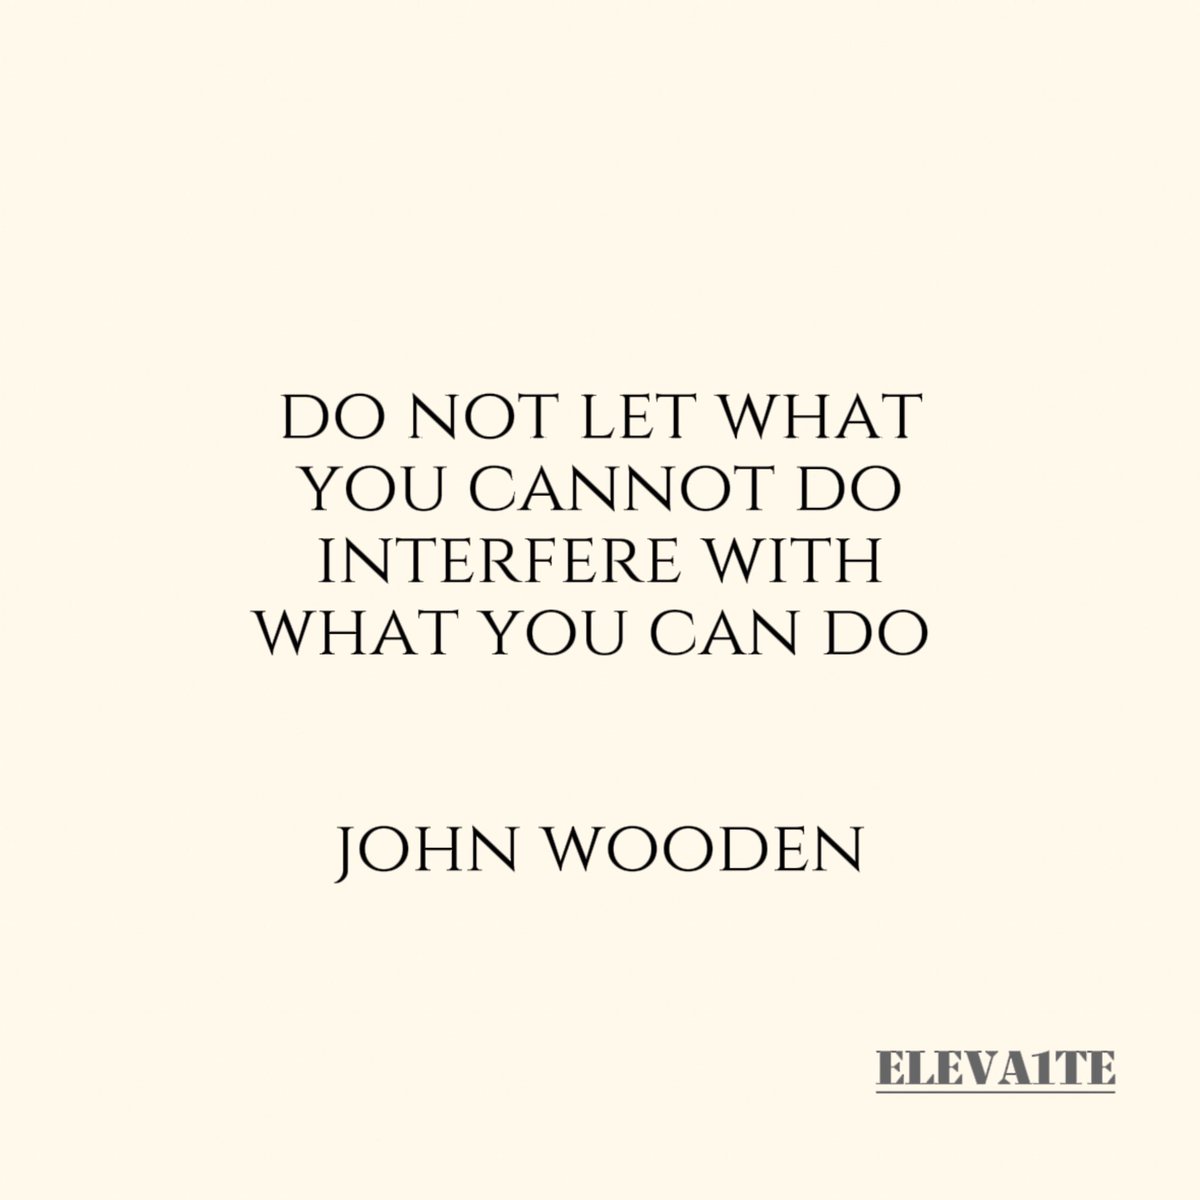 Focus On What You Can Do Igniting Potential With John Wooden #eleva1te #eleva1te100 #r1zefocusconquer #motivation #motivationalquotes #motivationquotes #motivateyourself #chosenone #consistencyiskey #hardworkpaysoff #RiseTogether #dreamchaser #LearnAndGrind #grind #grindset